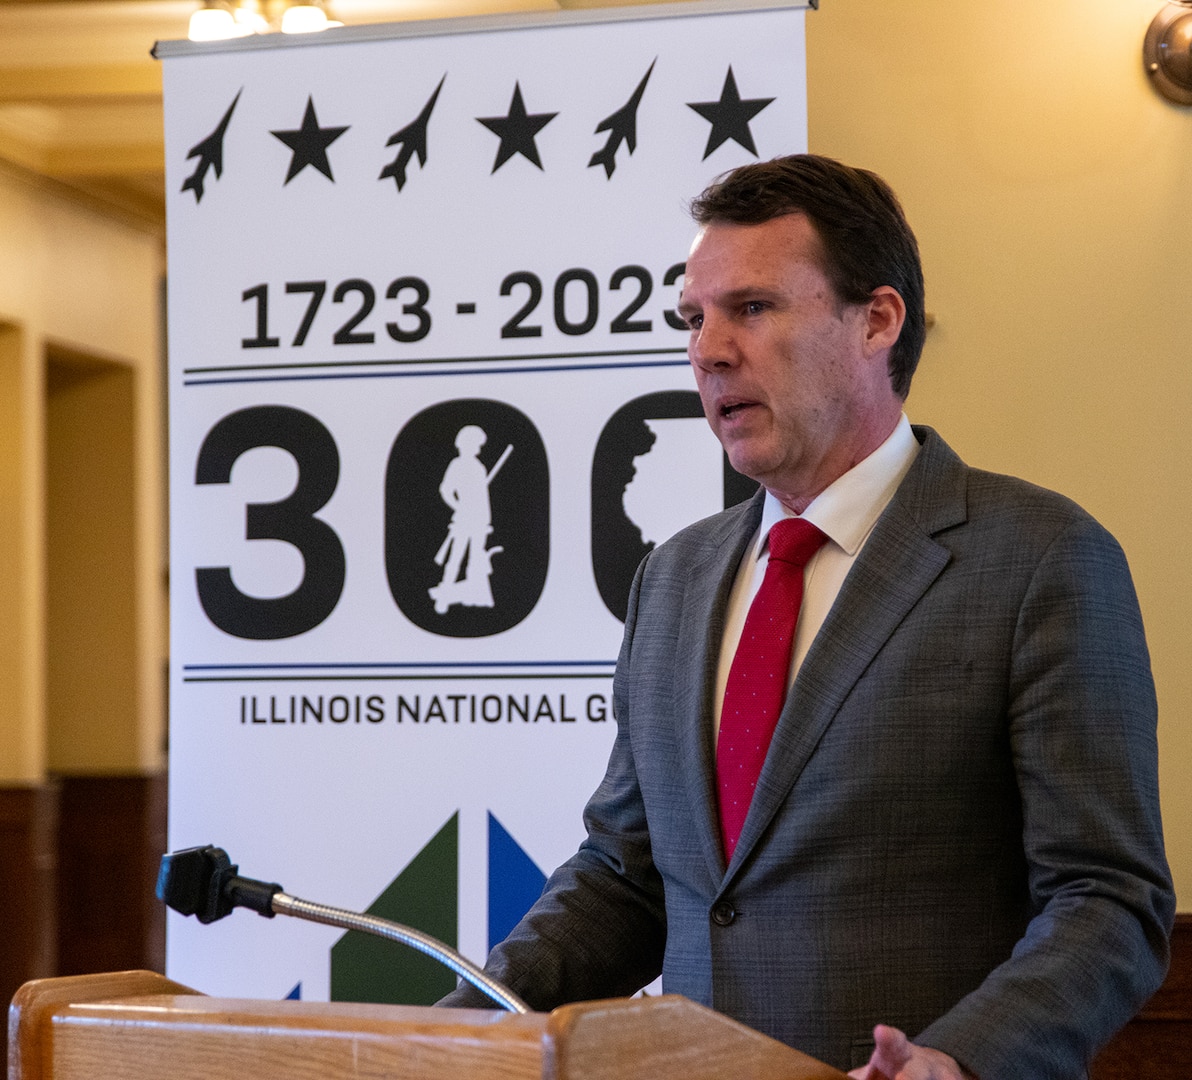 Chris Elstoft, Consul General of Australia in Chicago, talks about the Illinois National Guard and Australia’s shared history, during a ceremony commemorating the Battle of Hamel, a World War I battle which marked the first time U.S. forces fought alongside the Australian military, and marking the 300th birthday of the Illinois National Guard in Springfield May 6.